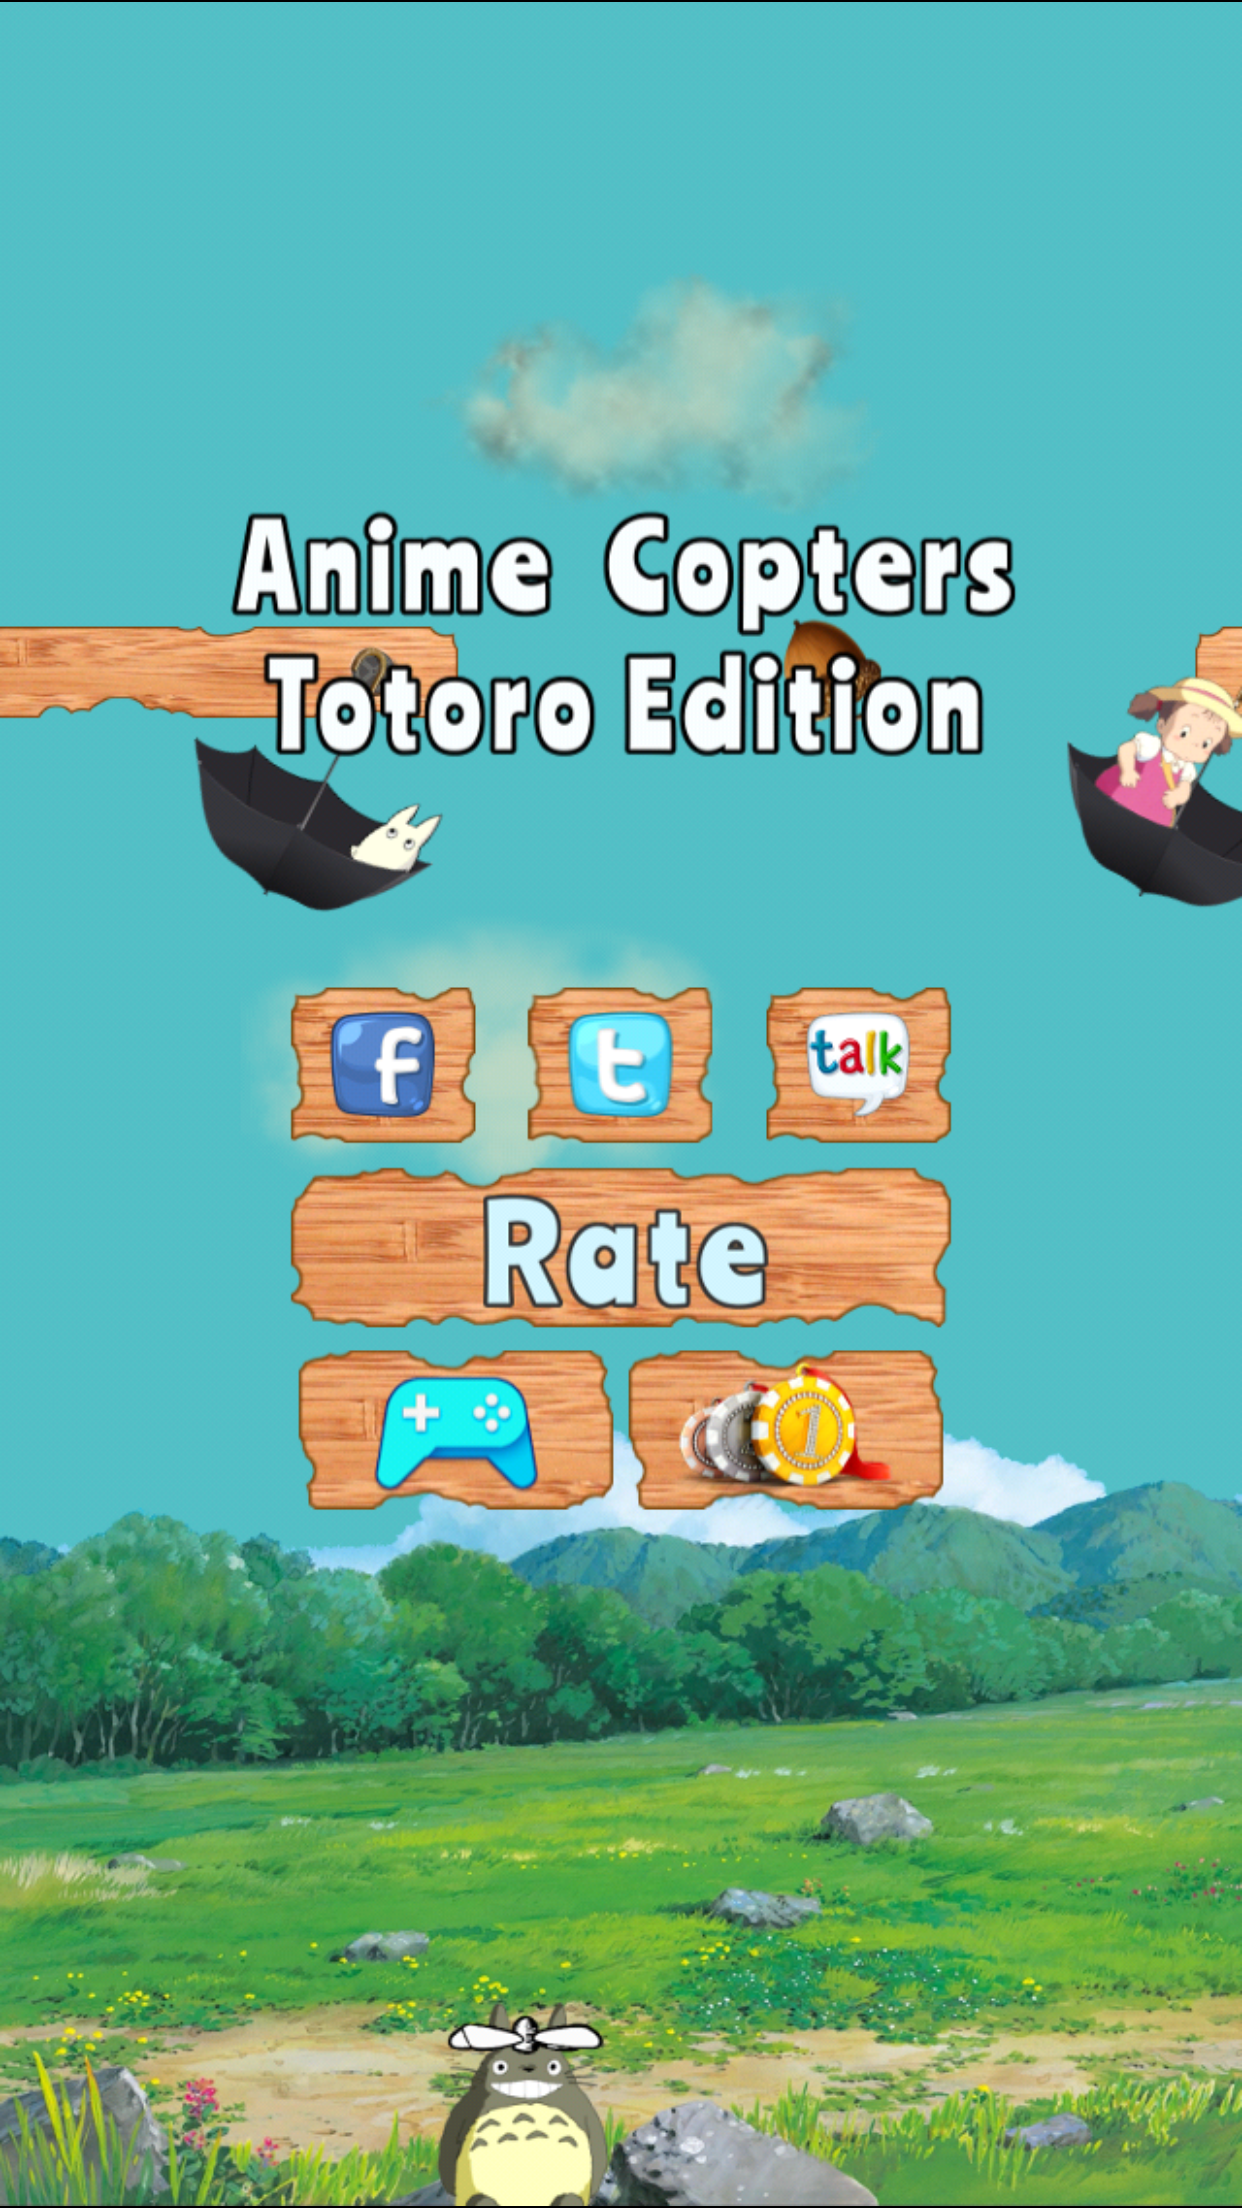 Anime Copters - Totoro Edition